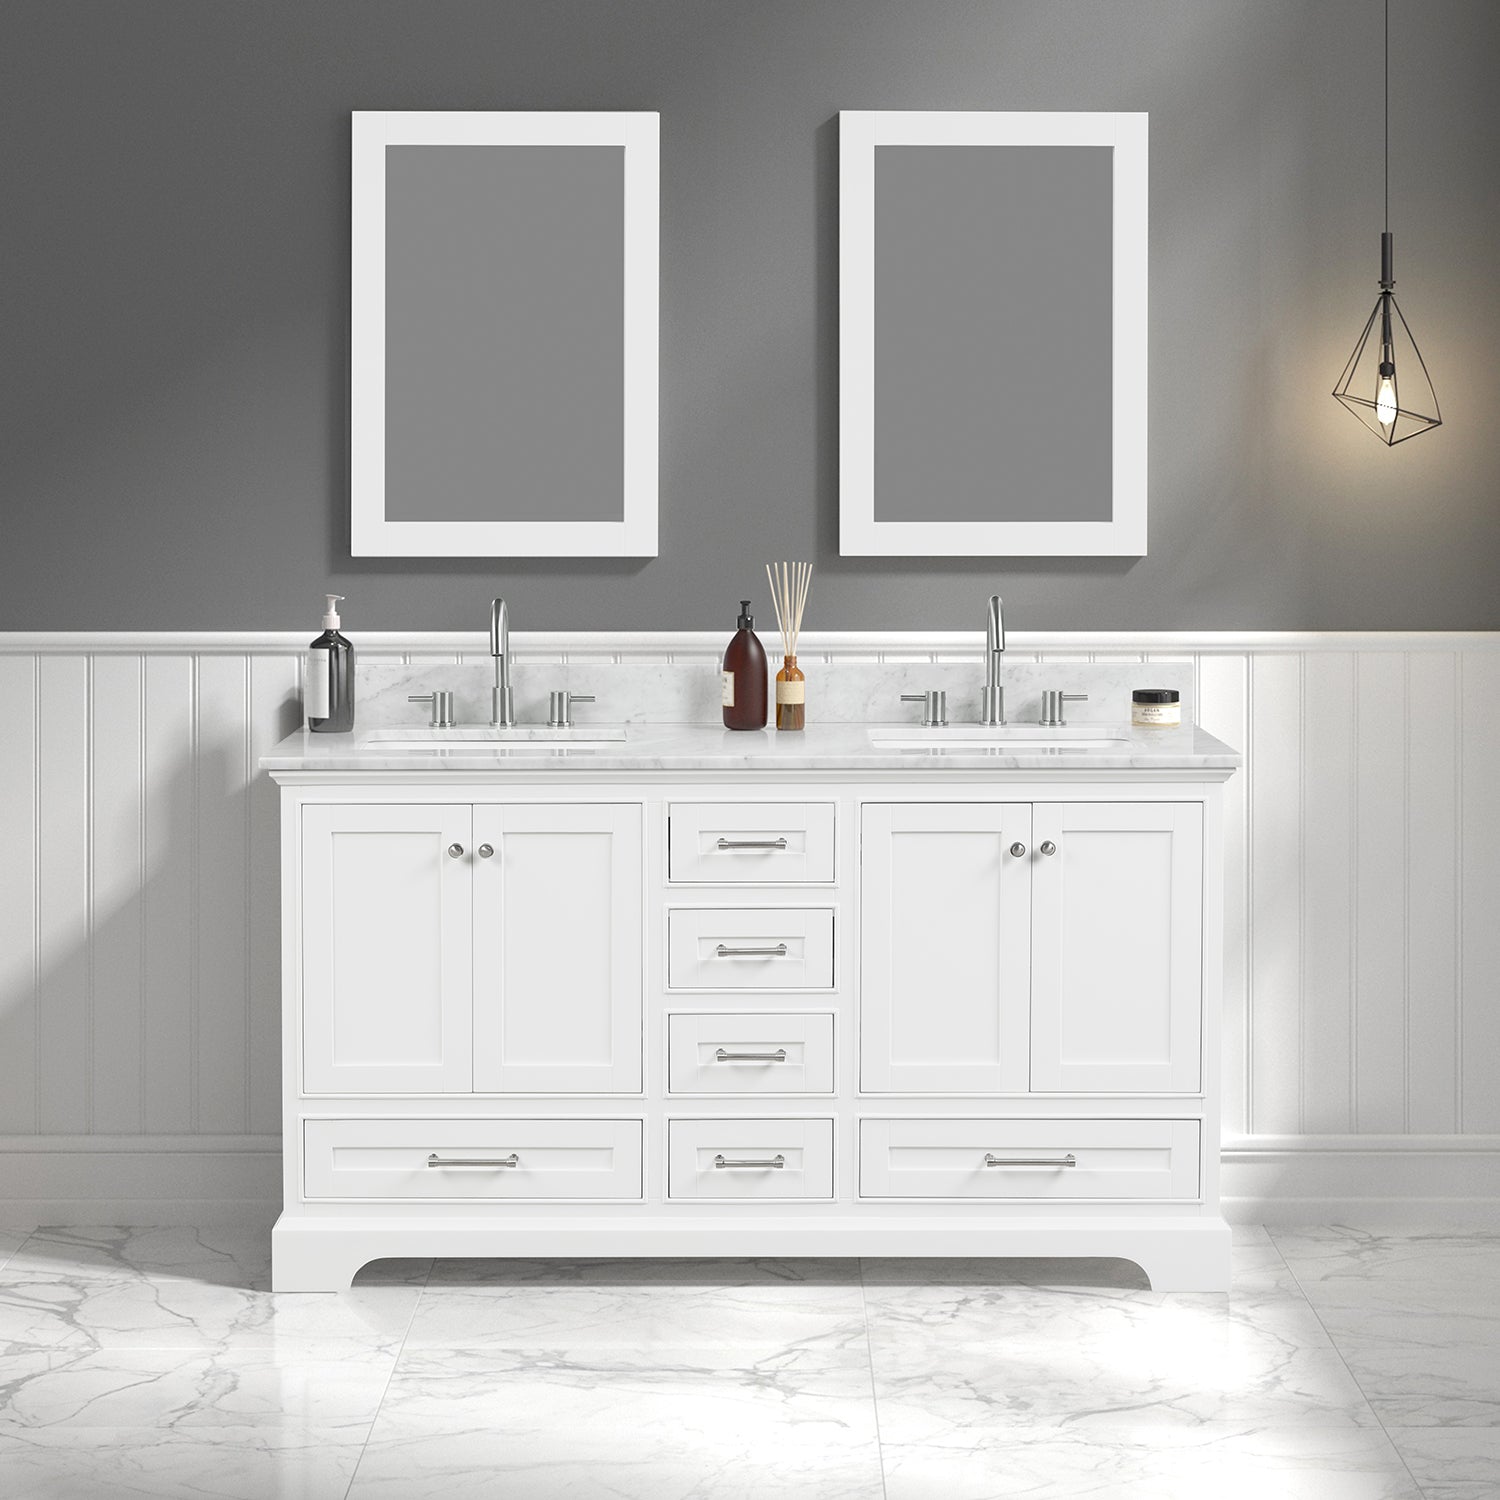 bath vanity cabinets are expertly crafted with premium materials, offering style and functionality.